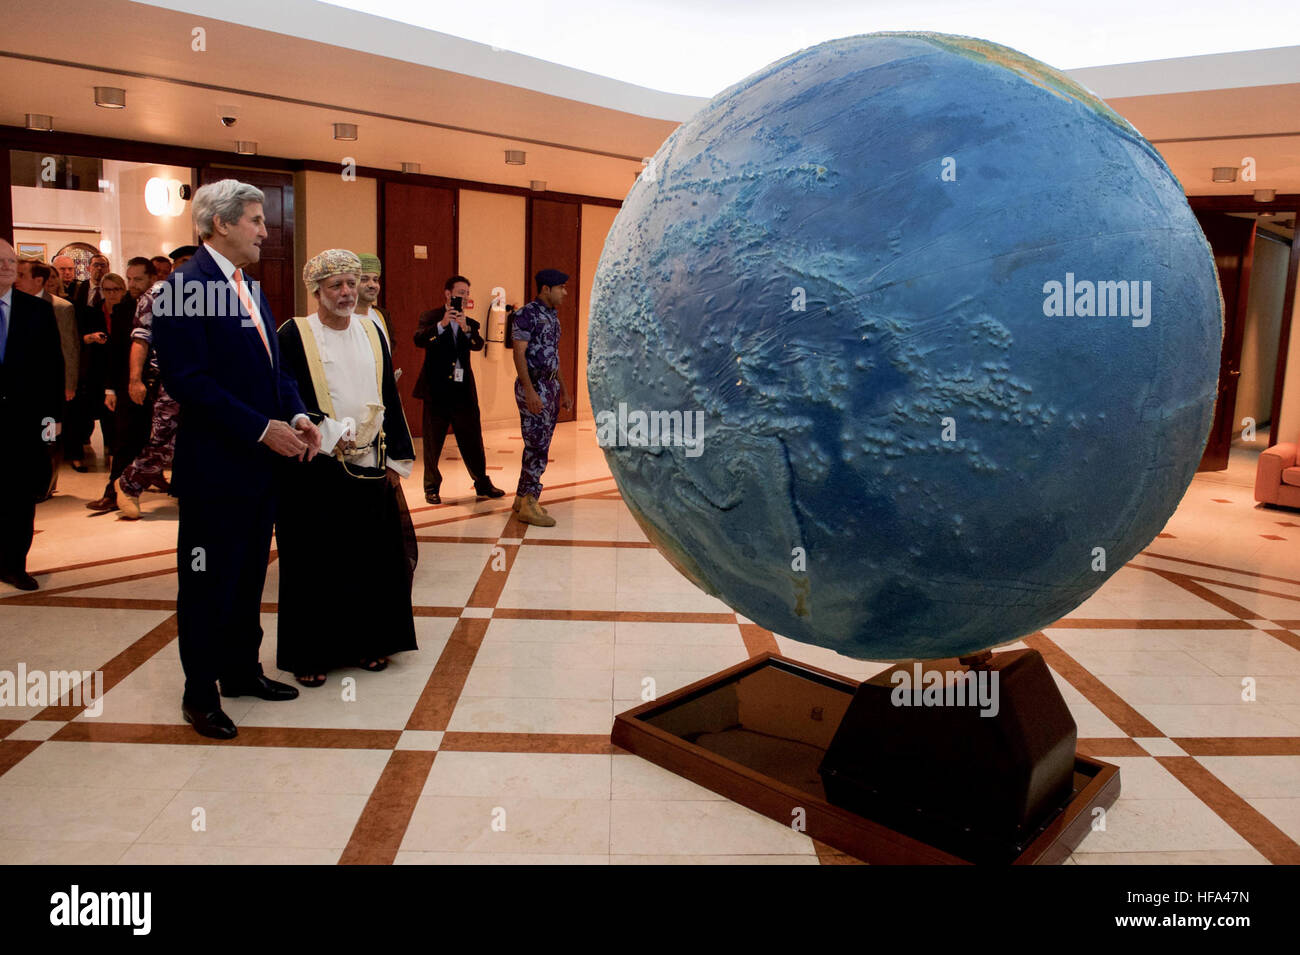 U.S. Secretary of State John Kerry and Omani Foreign Minister Yusuf bin Alawi look at a rotating globe after the Secretary arrived at the Ministry of Foreign Affairs in Muscat, Oman, for a bilateral meeting preceding a conversation with Sultan Qaboos on November 14, 2016. Stock Photo